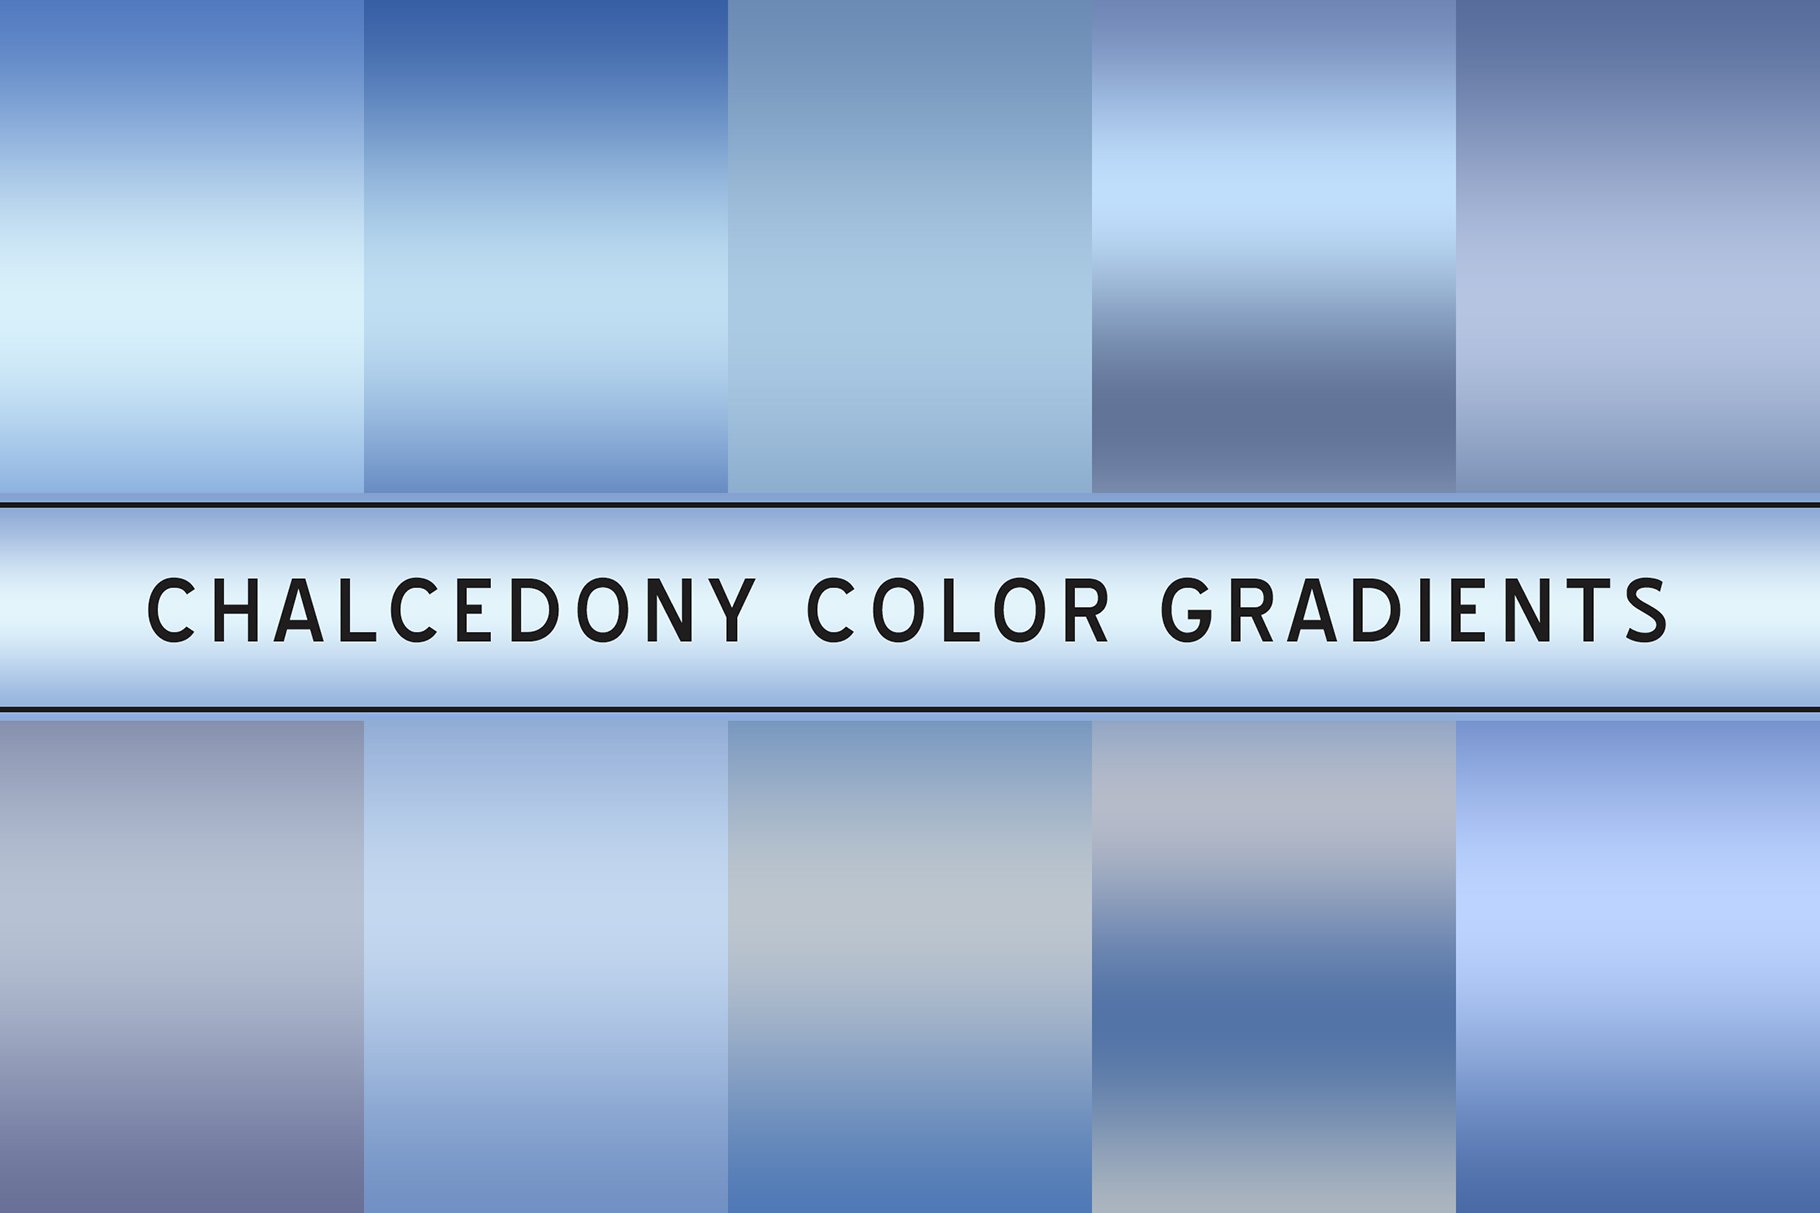 Chalcedony Color Gradients cover image.